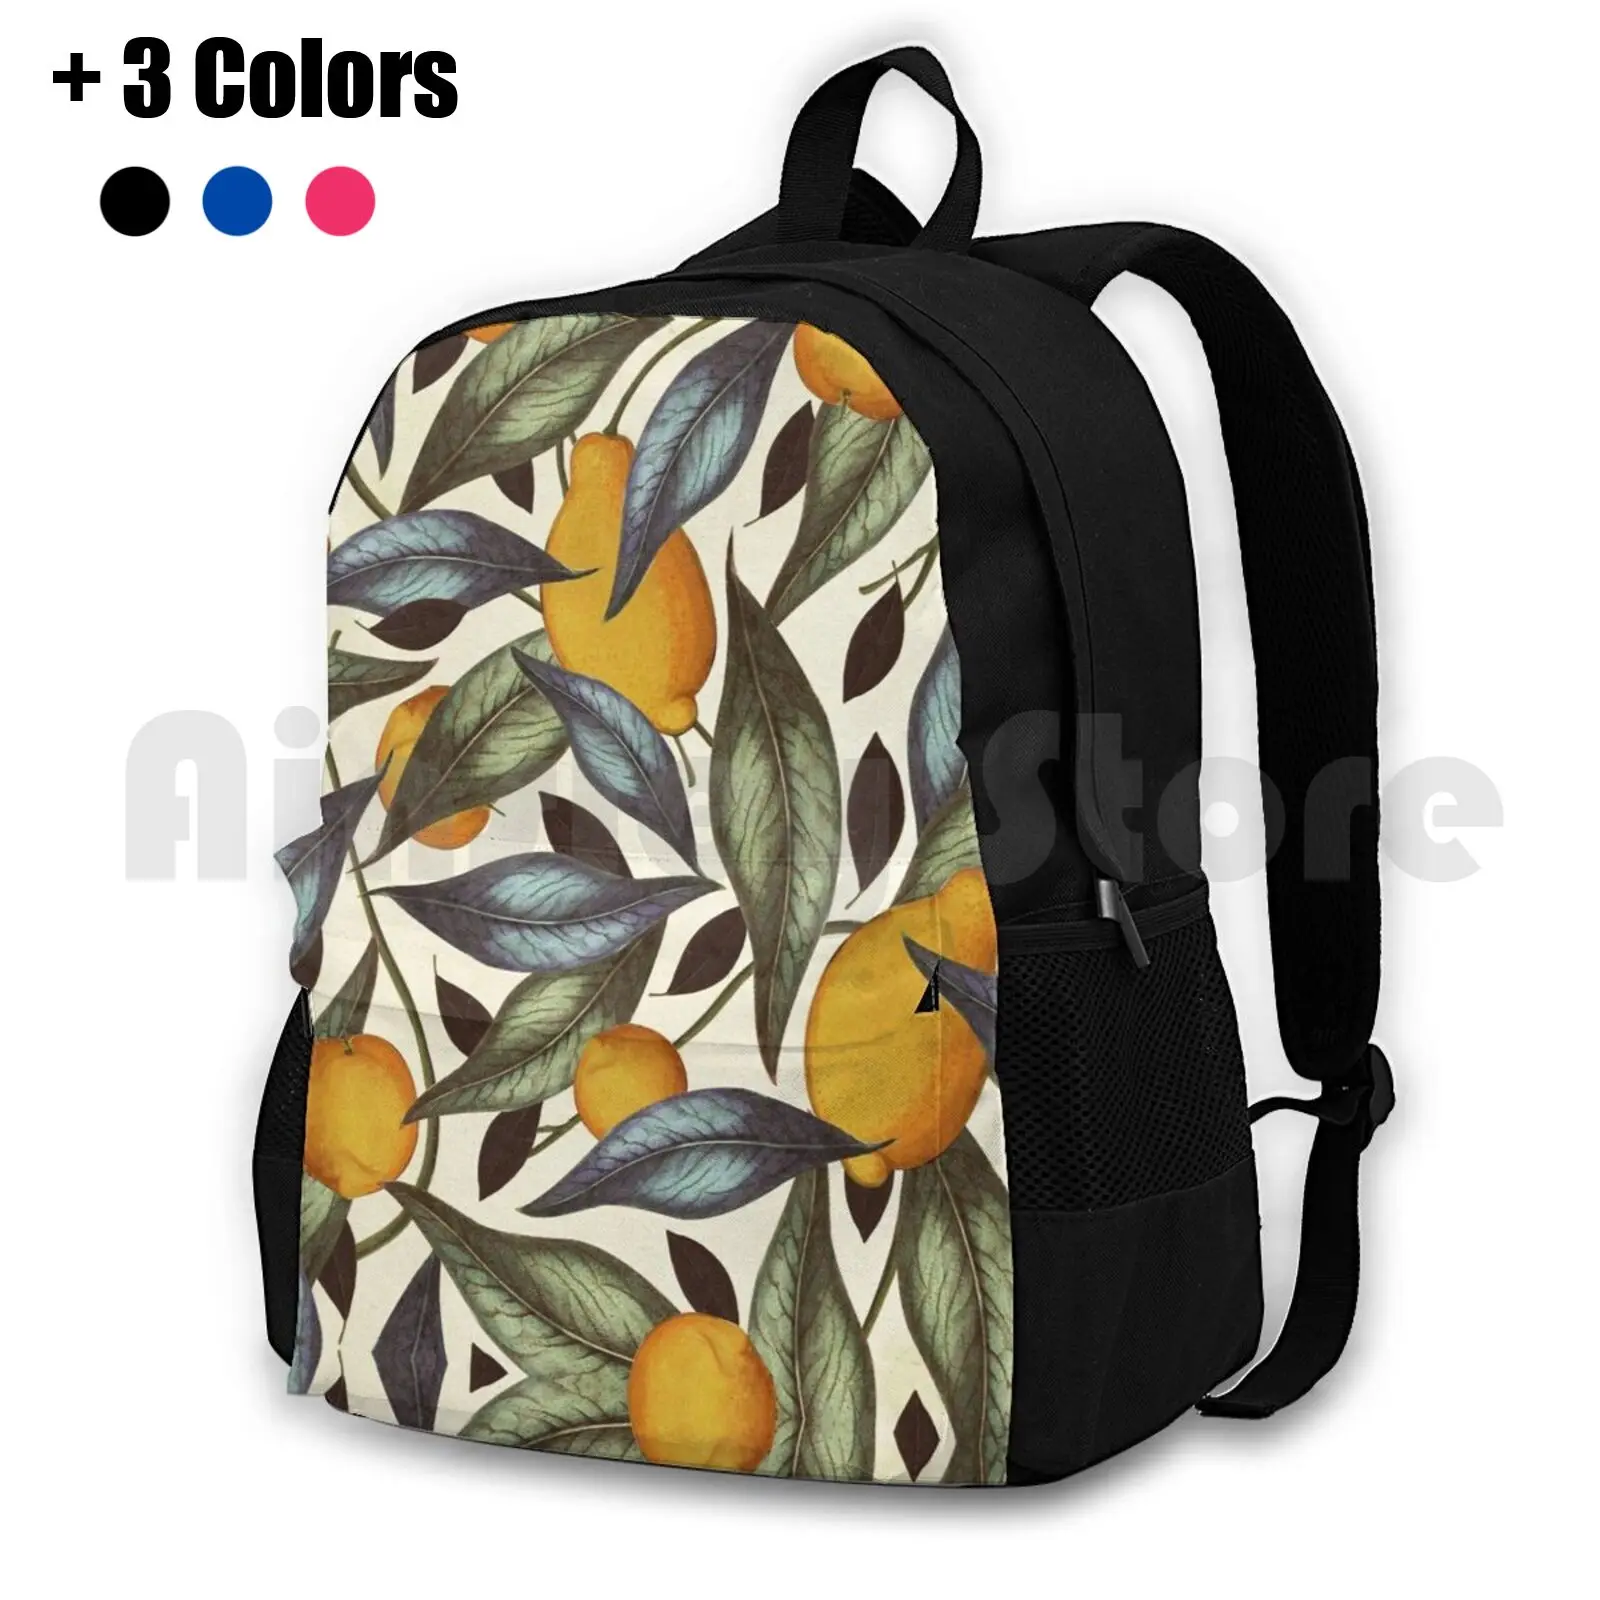 Dicky Bow-Julia Outdoor Hiking Backpack Riding Climbing Sports Bag Botanical Nature Vintage Flowers Floral Fruit Pears Healthy